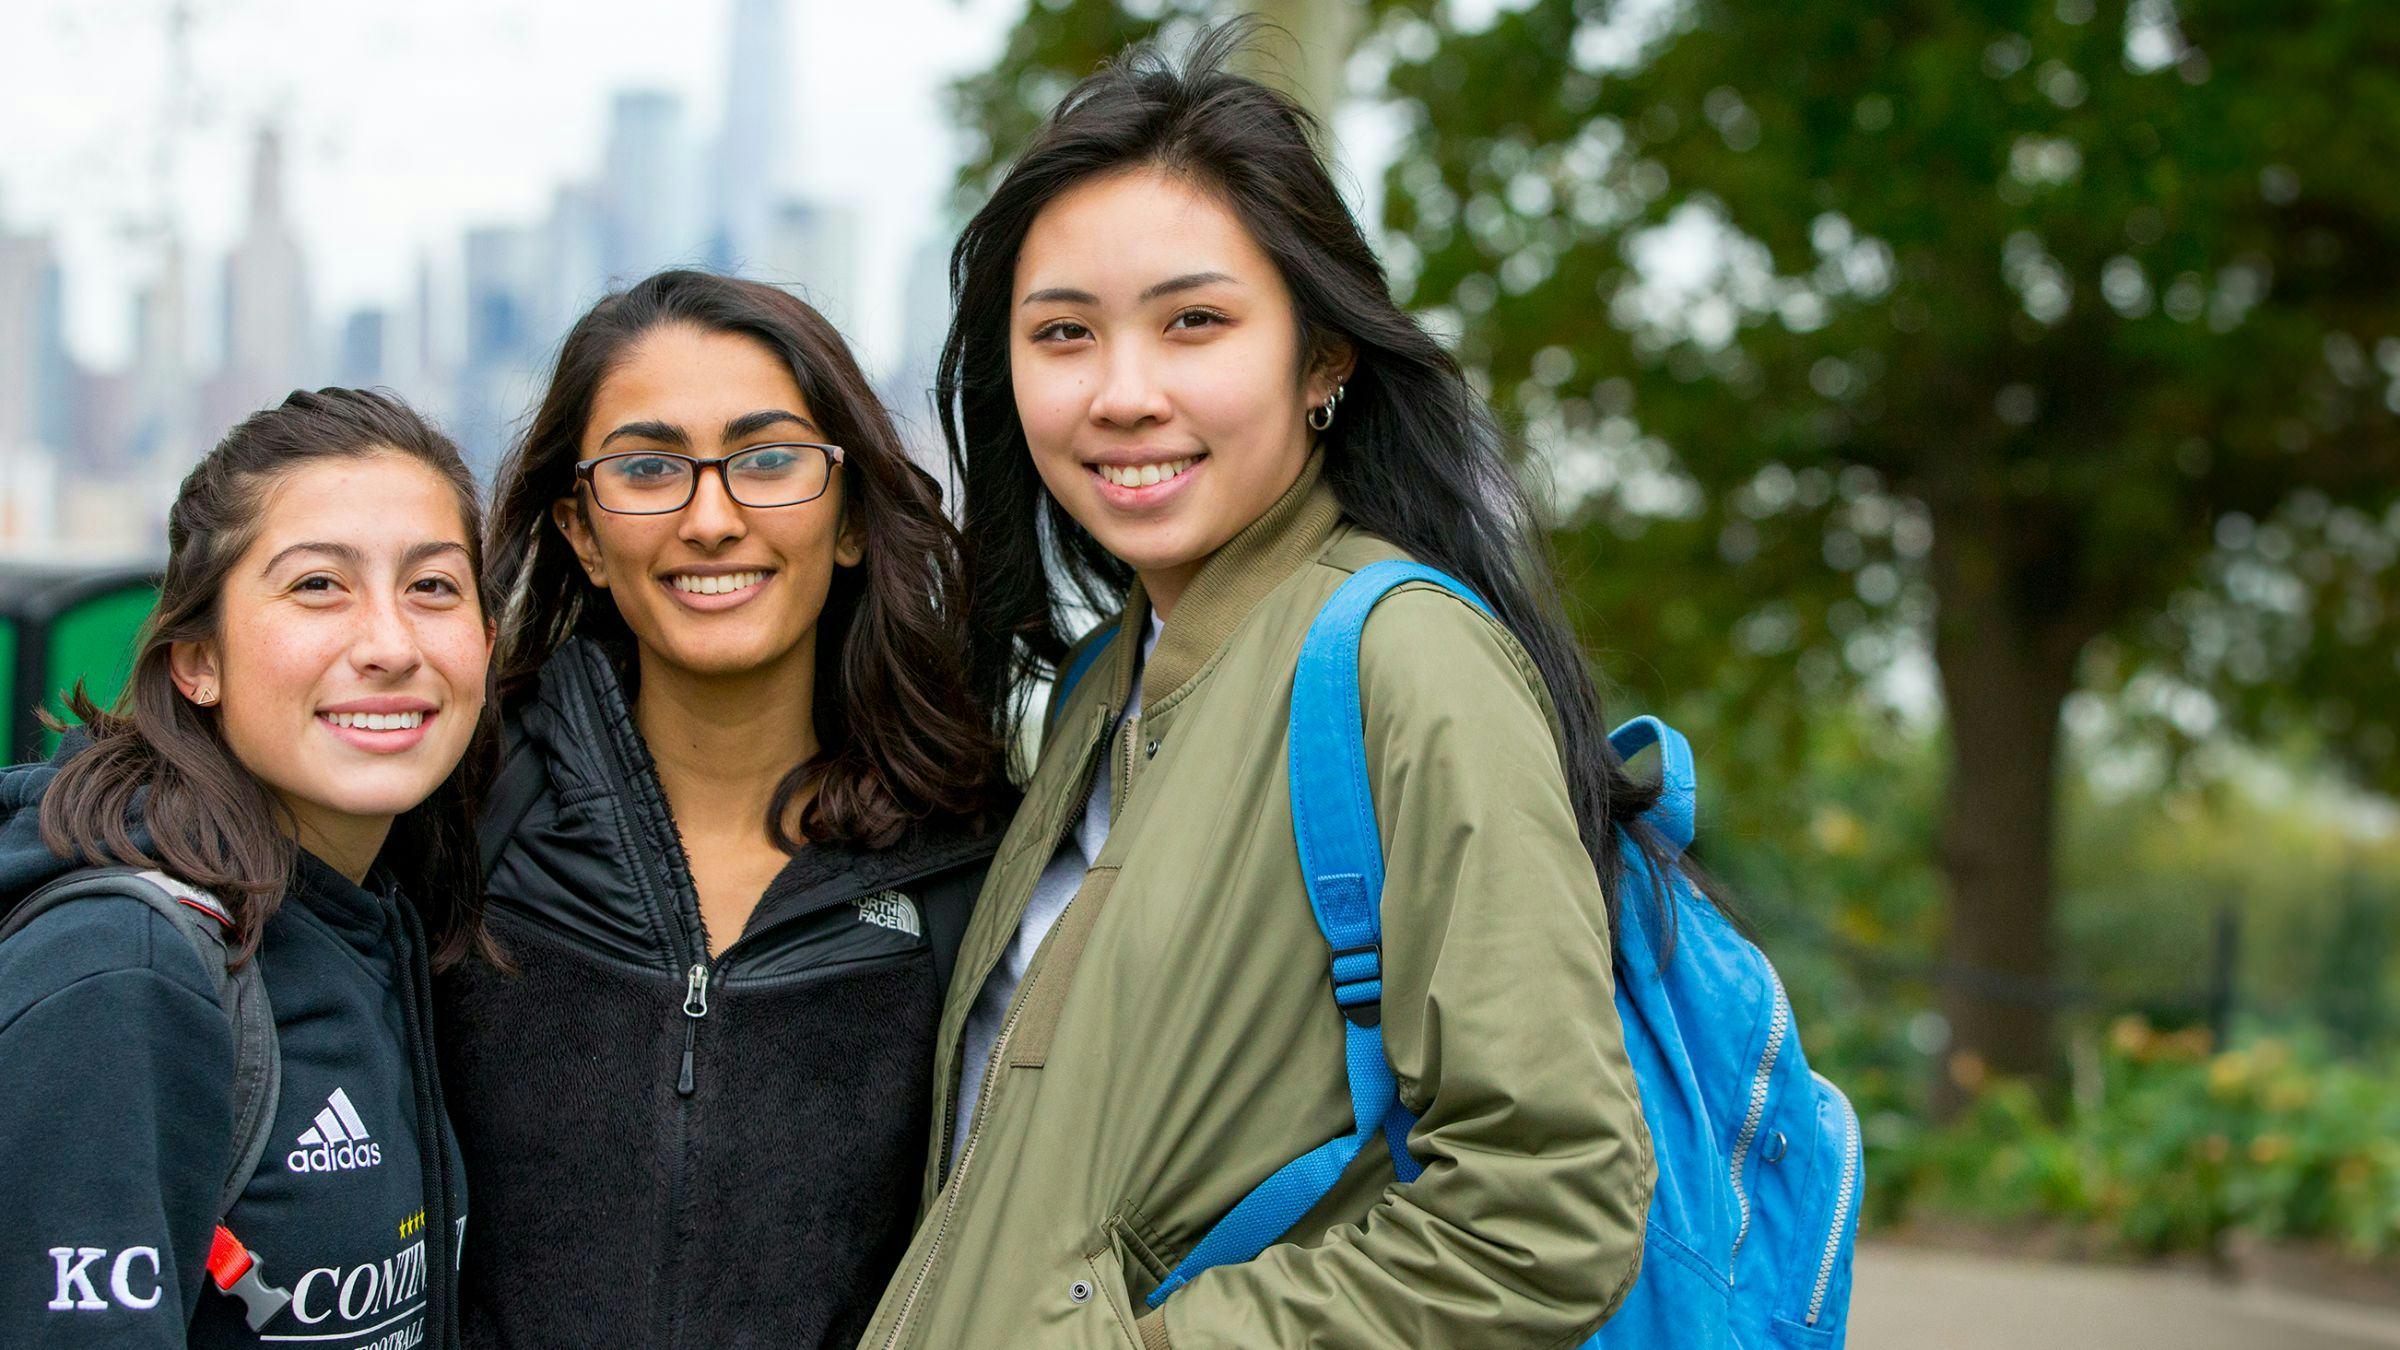 Three female students in the foreground with NYC skyline in the background